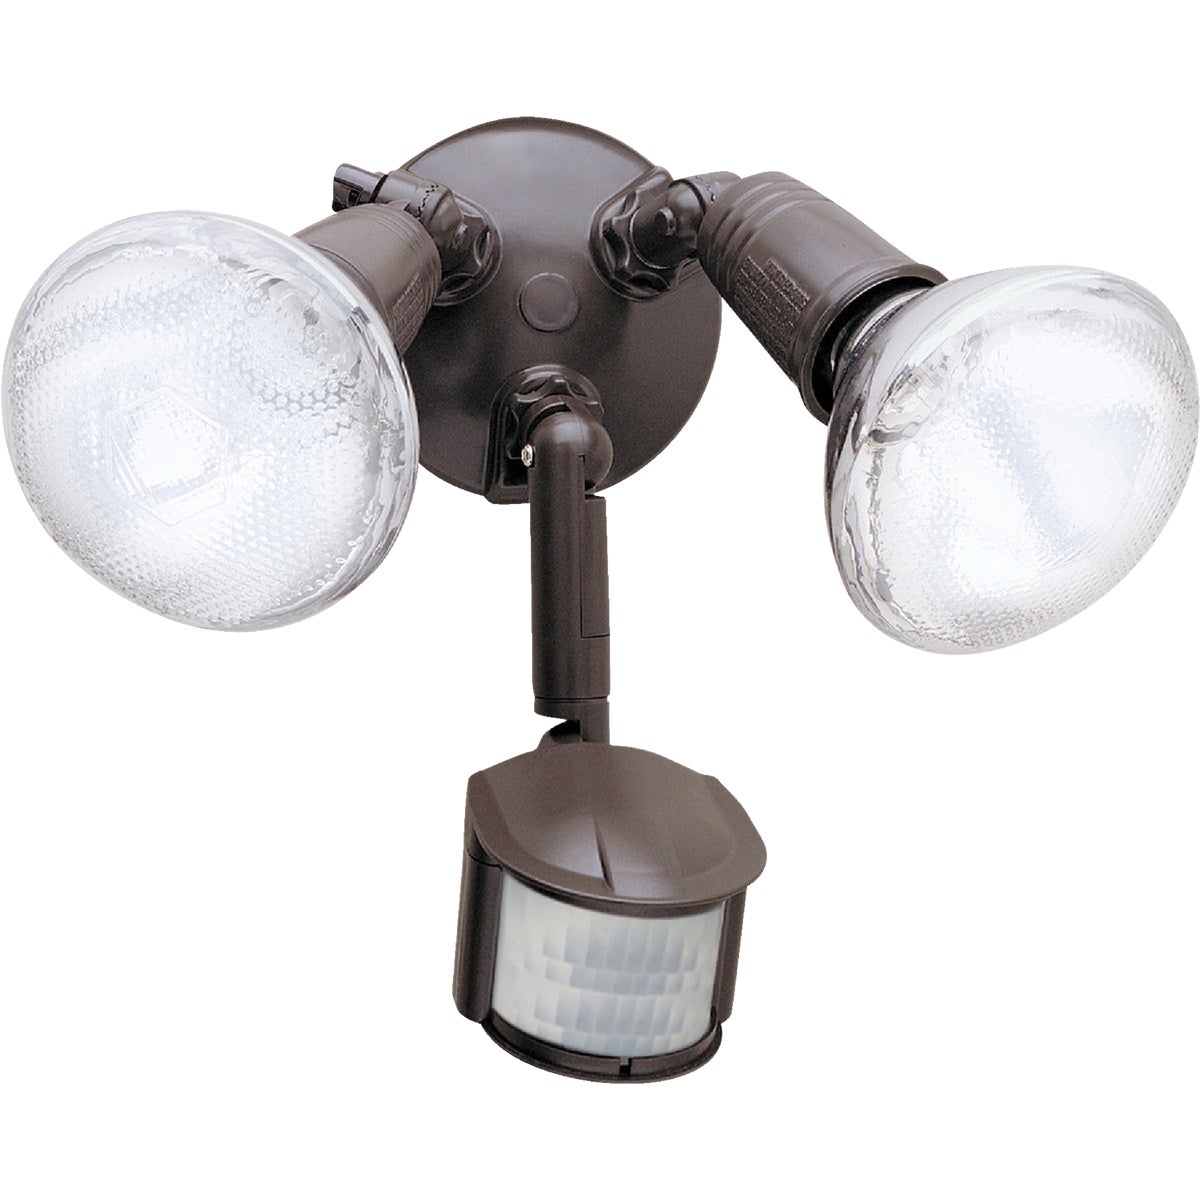 Item 533300, Motion activated twin floodlight fixtures featuring 30 motion detection 